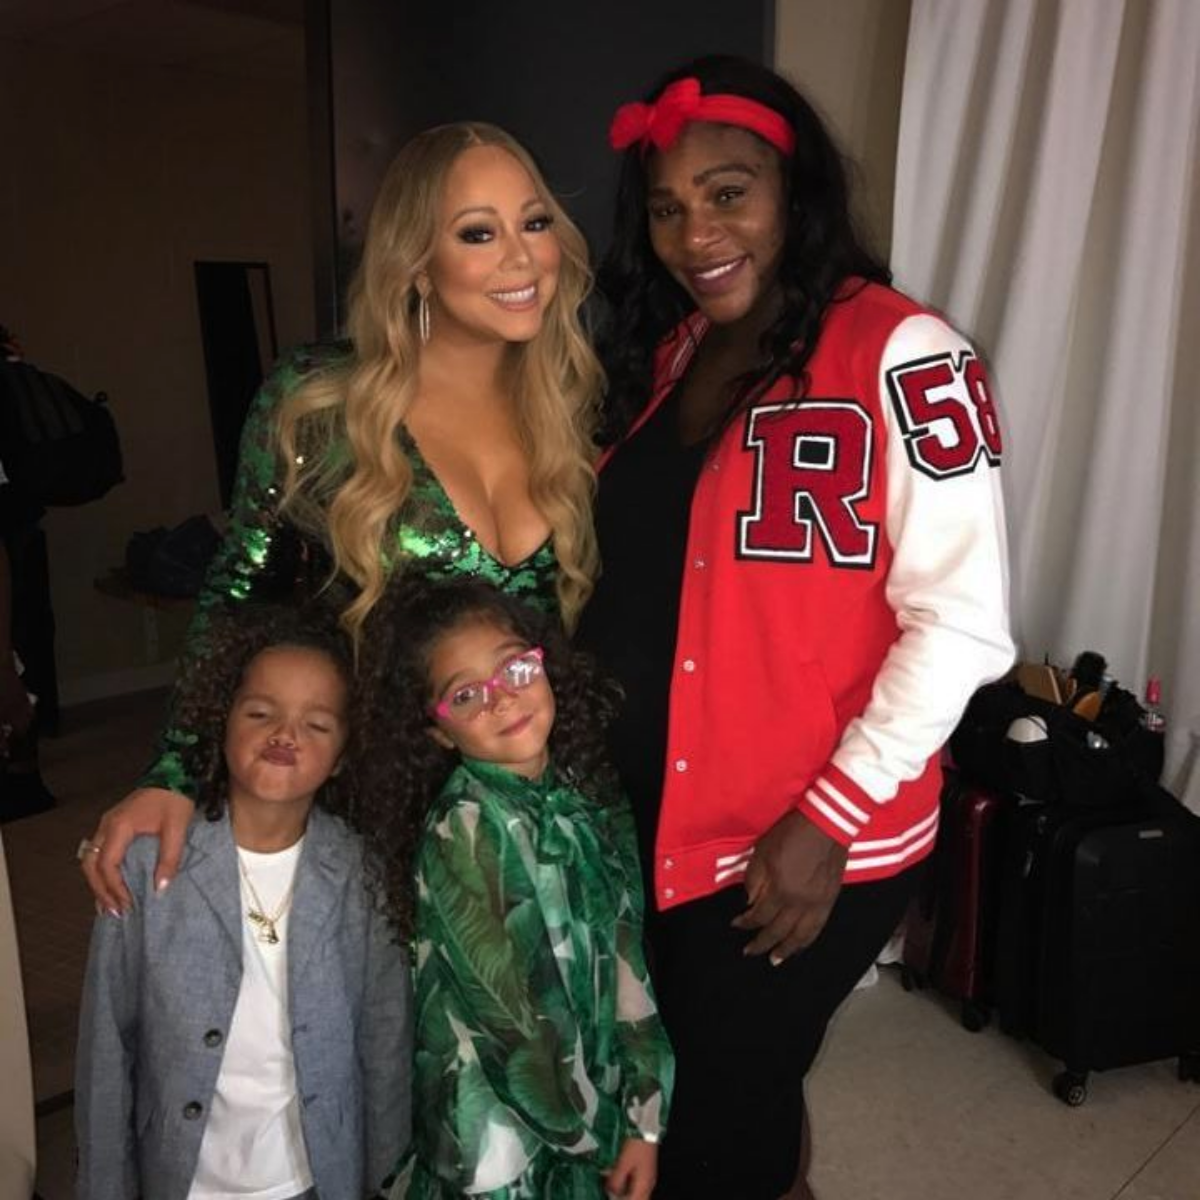 Serena Williams And Mariah Carey Hang Out Backstage With 'Dem Babies'
